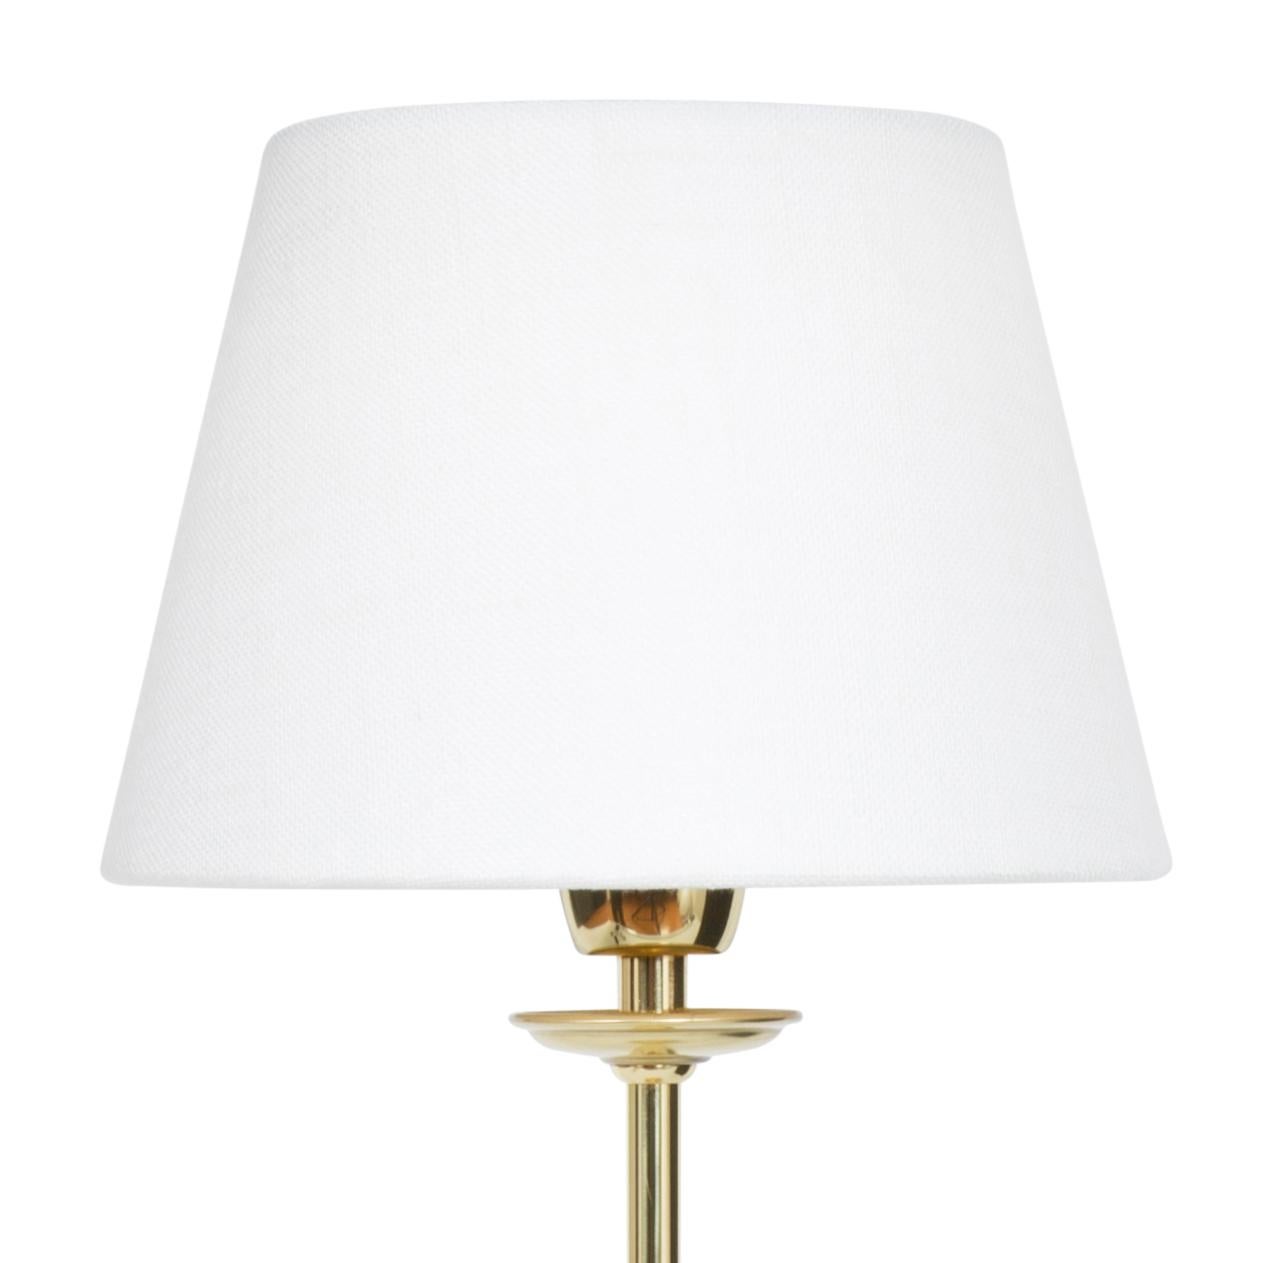 Lamp model Uno small polished brass table lamp designed by Konsthantverk and manufactured by themselves.

The production of lamps, wall lights and floor lamps are manufactured using craftsman’s techniques with the same materials and techniques as